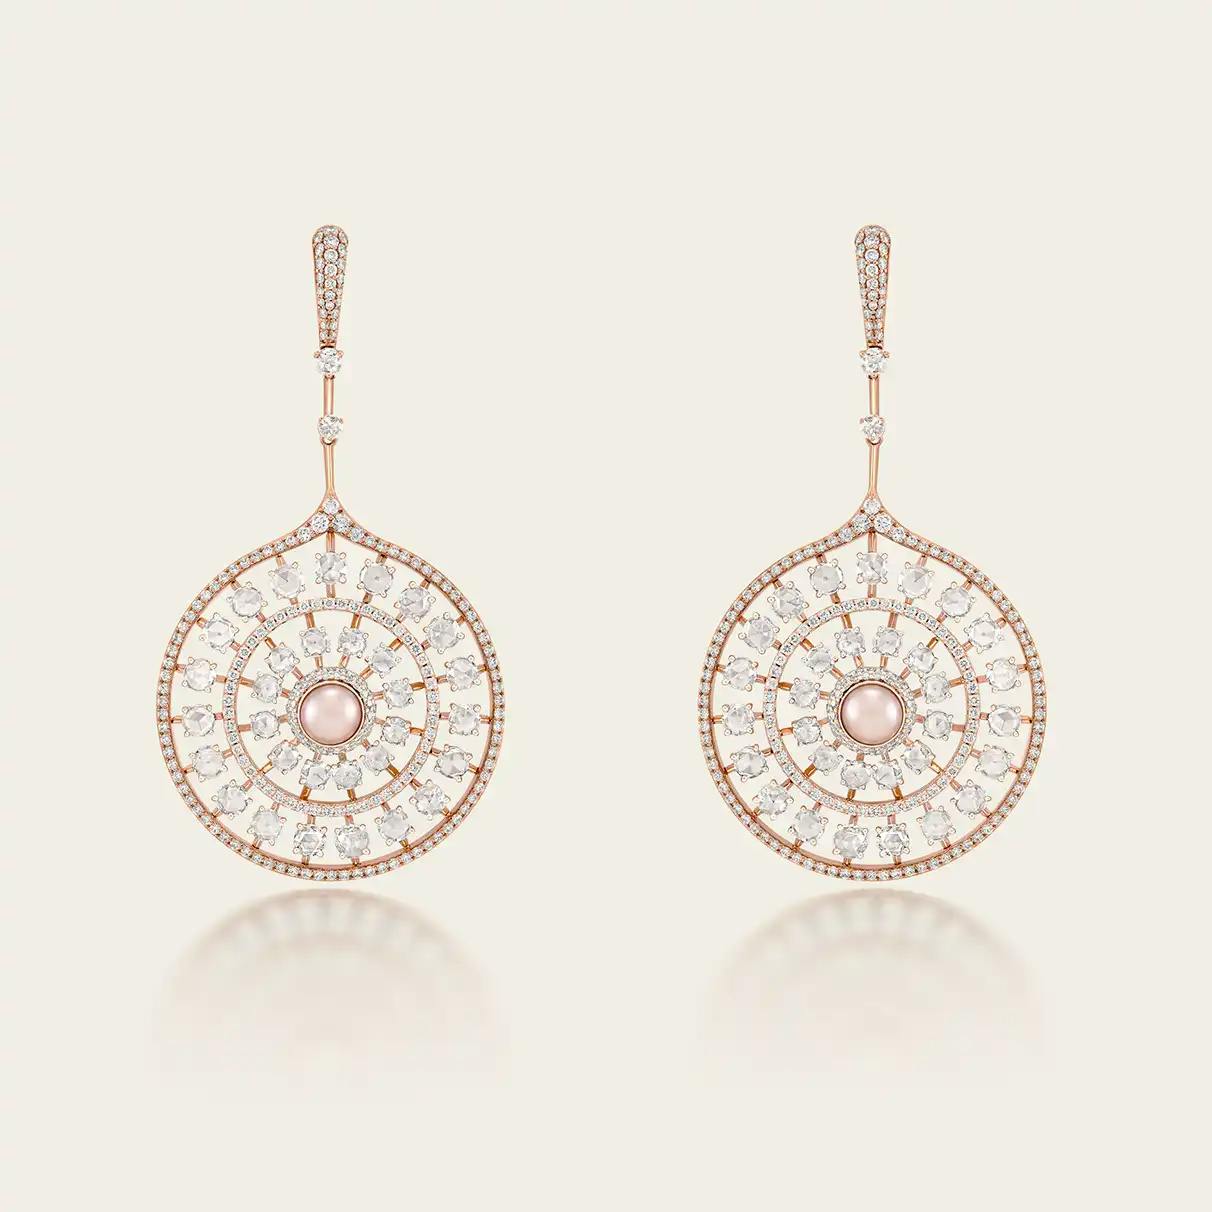 18K recycled rose gold earrings with rose-cut diamonds, Akoya pearls, pavé diamonds.